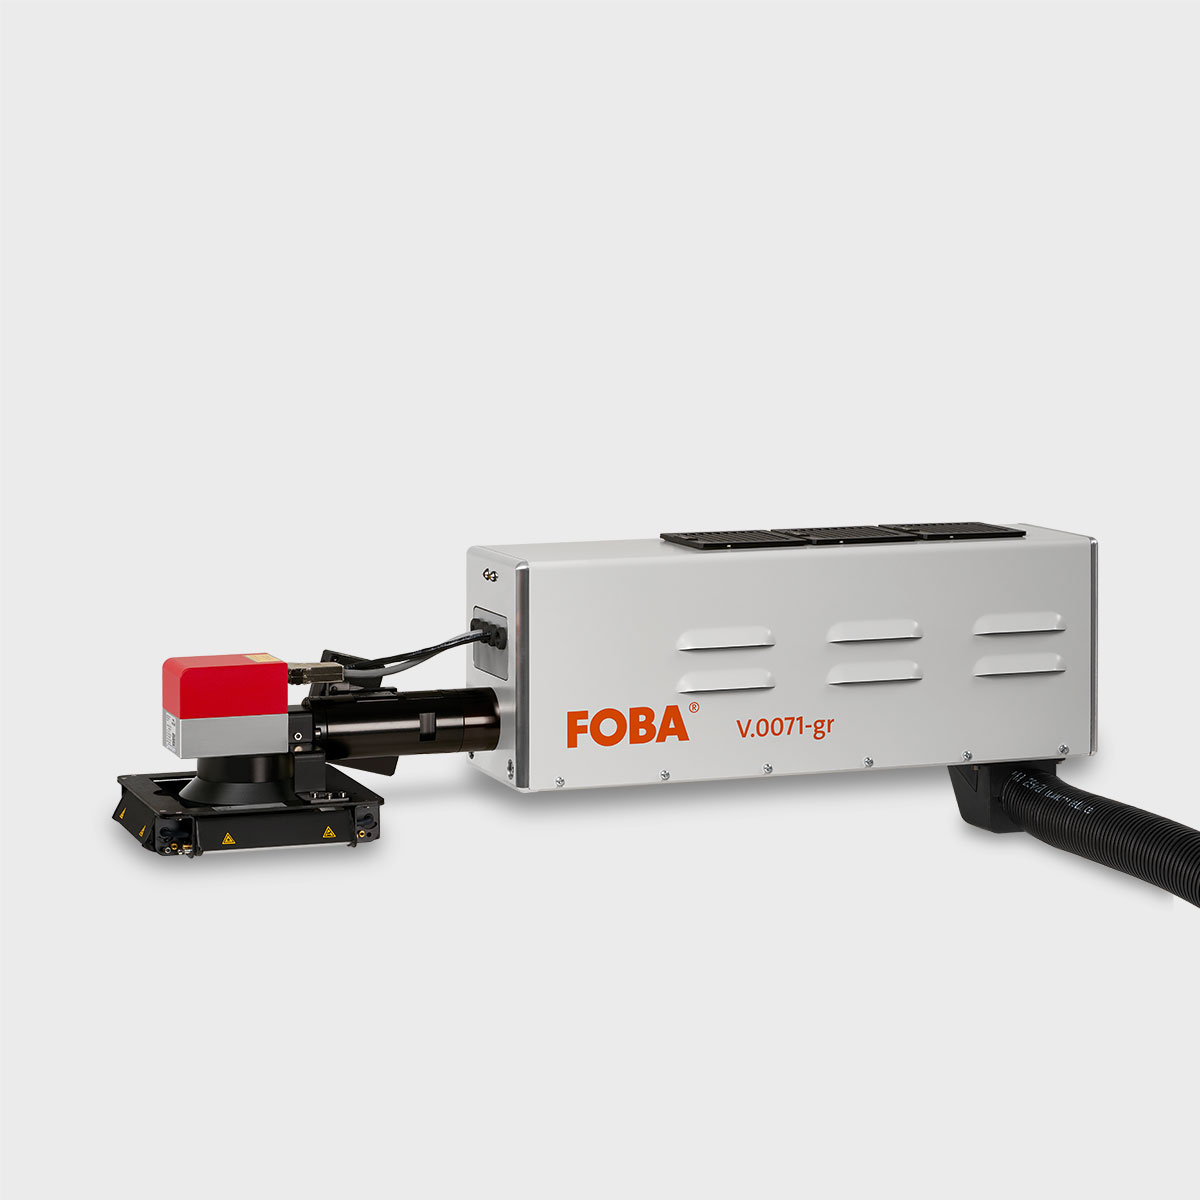 The green laser marking system FOBA Y.0141-gr is a 532 nm wavelength laser system with a vanadate source and 14-watt laser power.